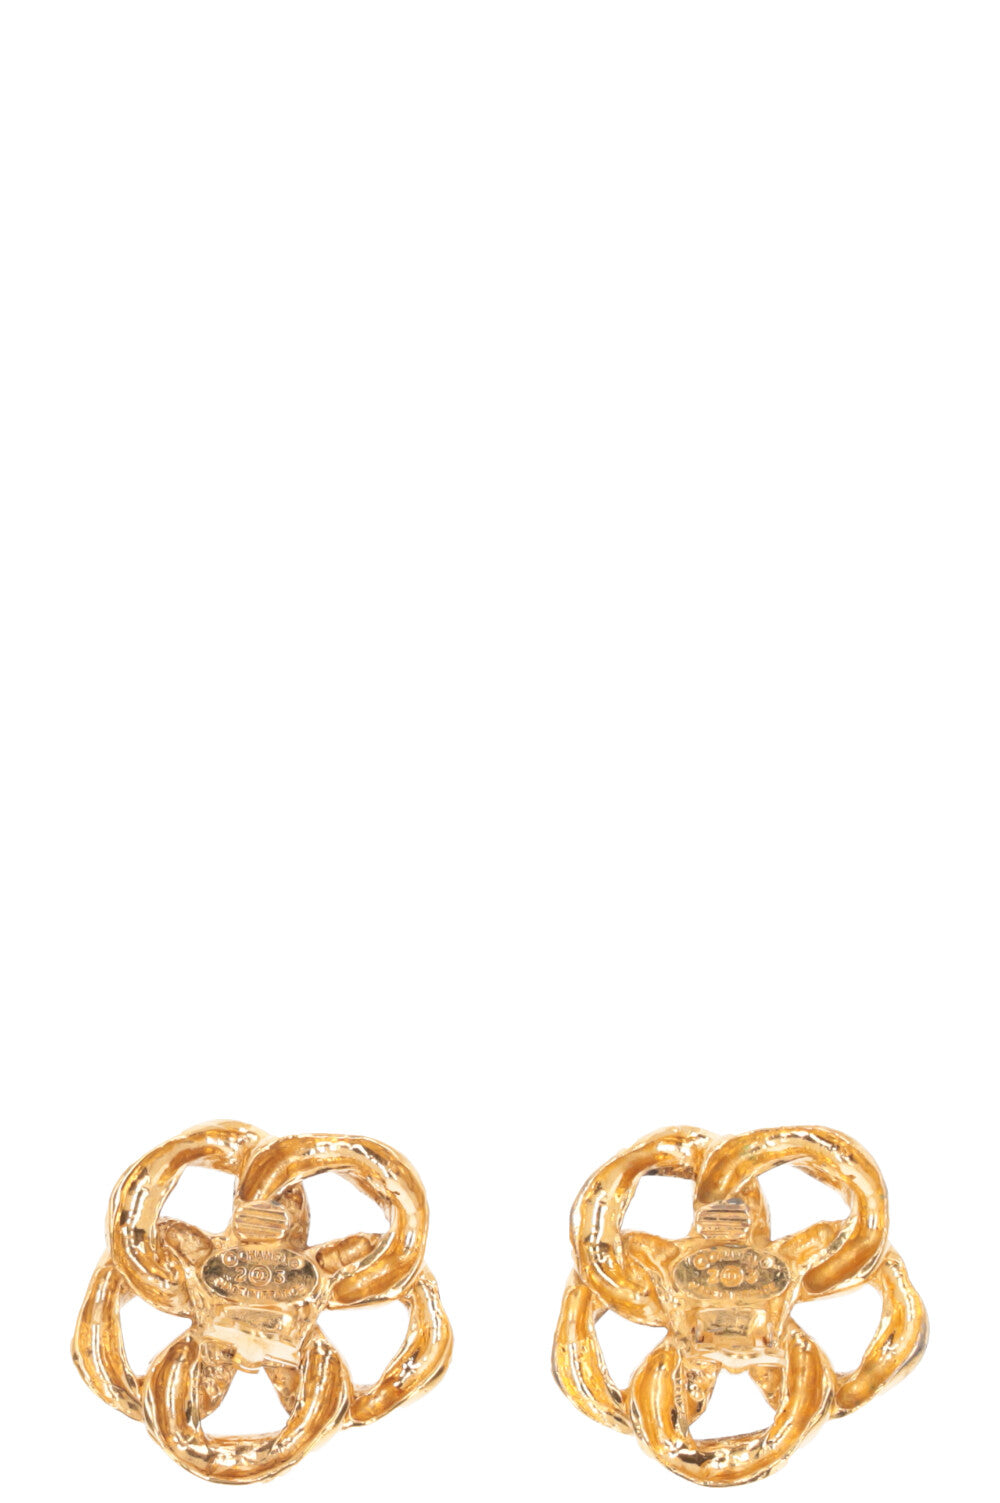 CHANEL Vintage Earrings Necklace